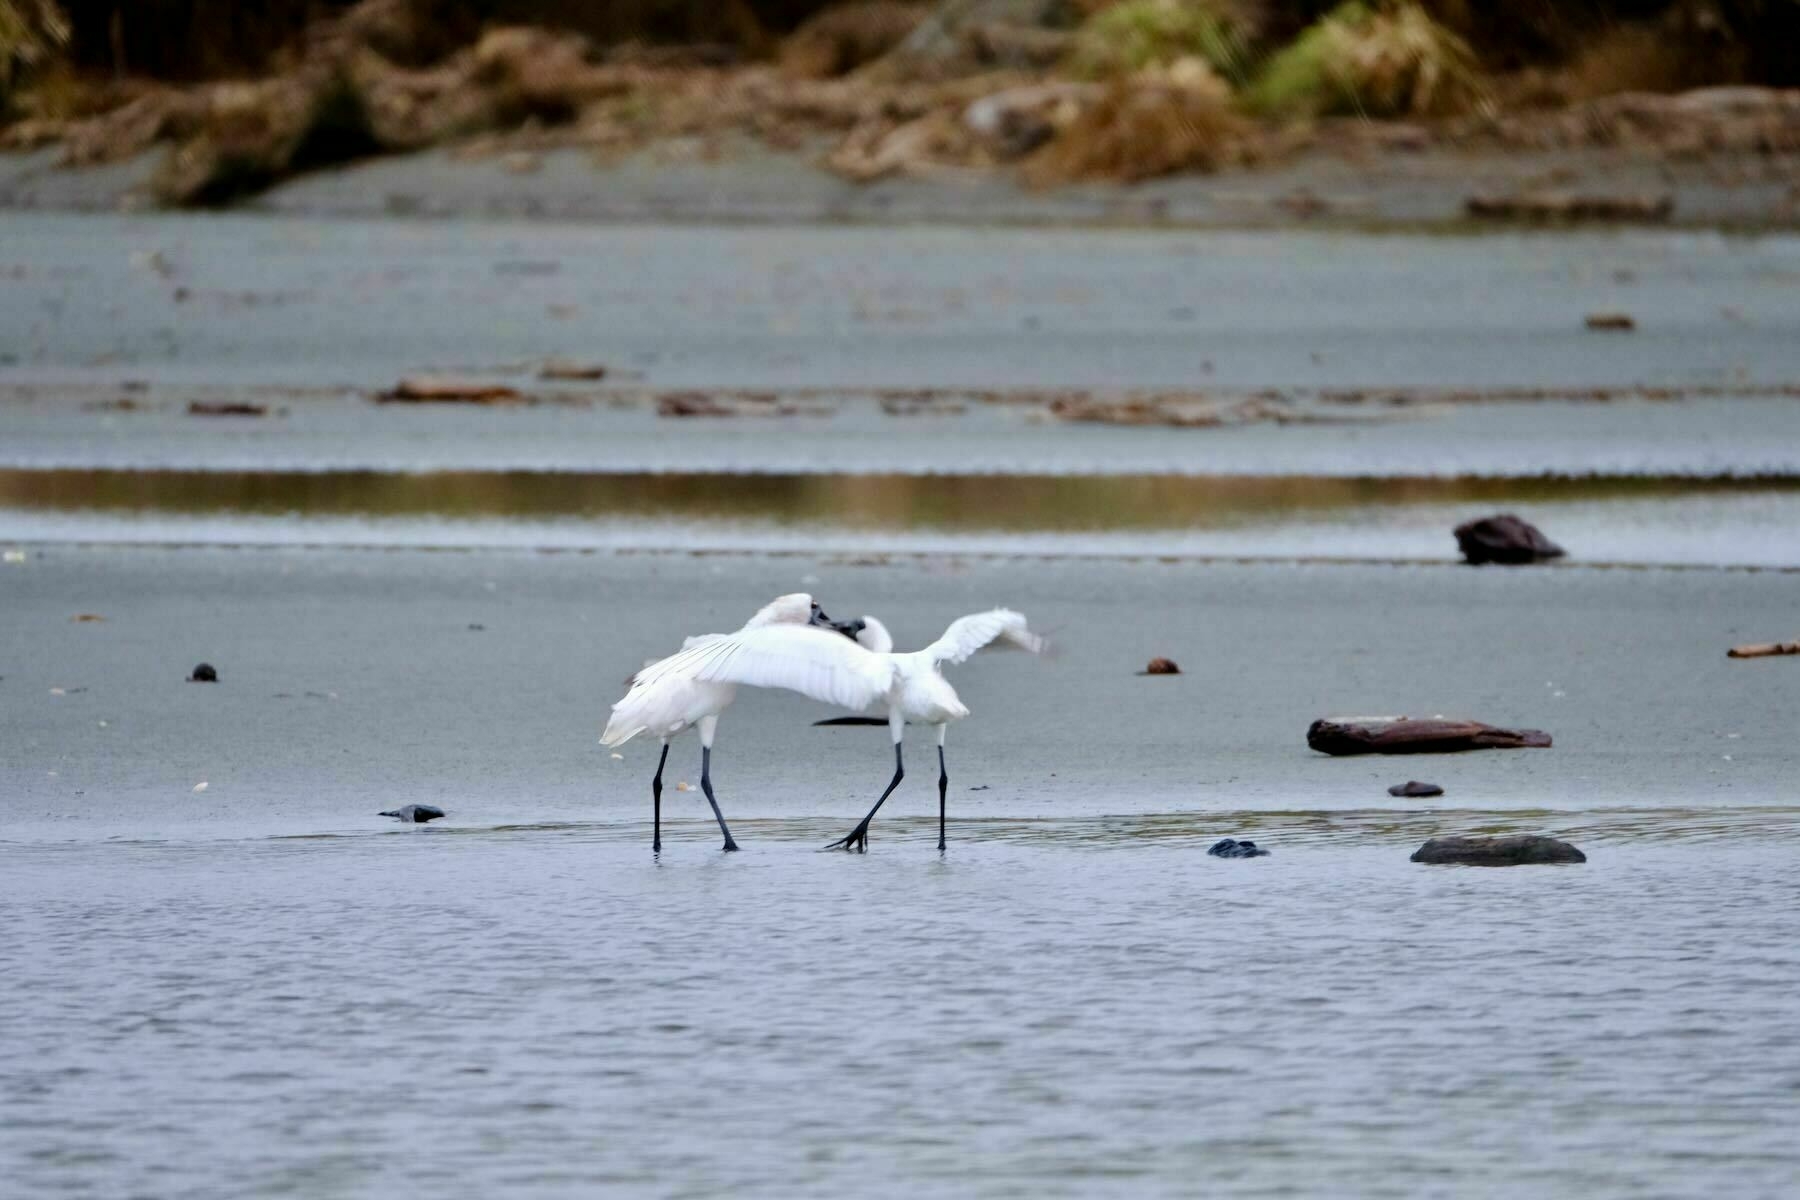 The adult spoonbill seems to feed the juvenile. 